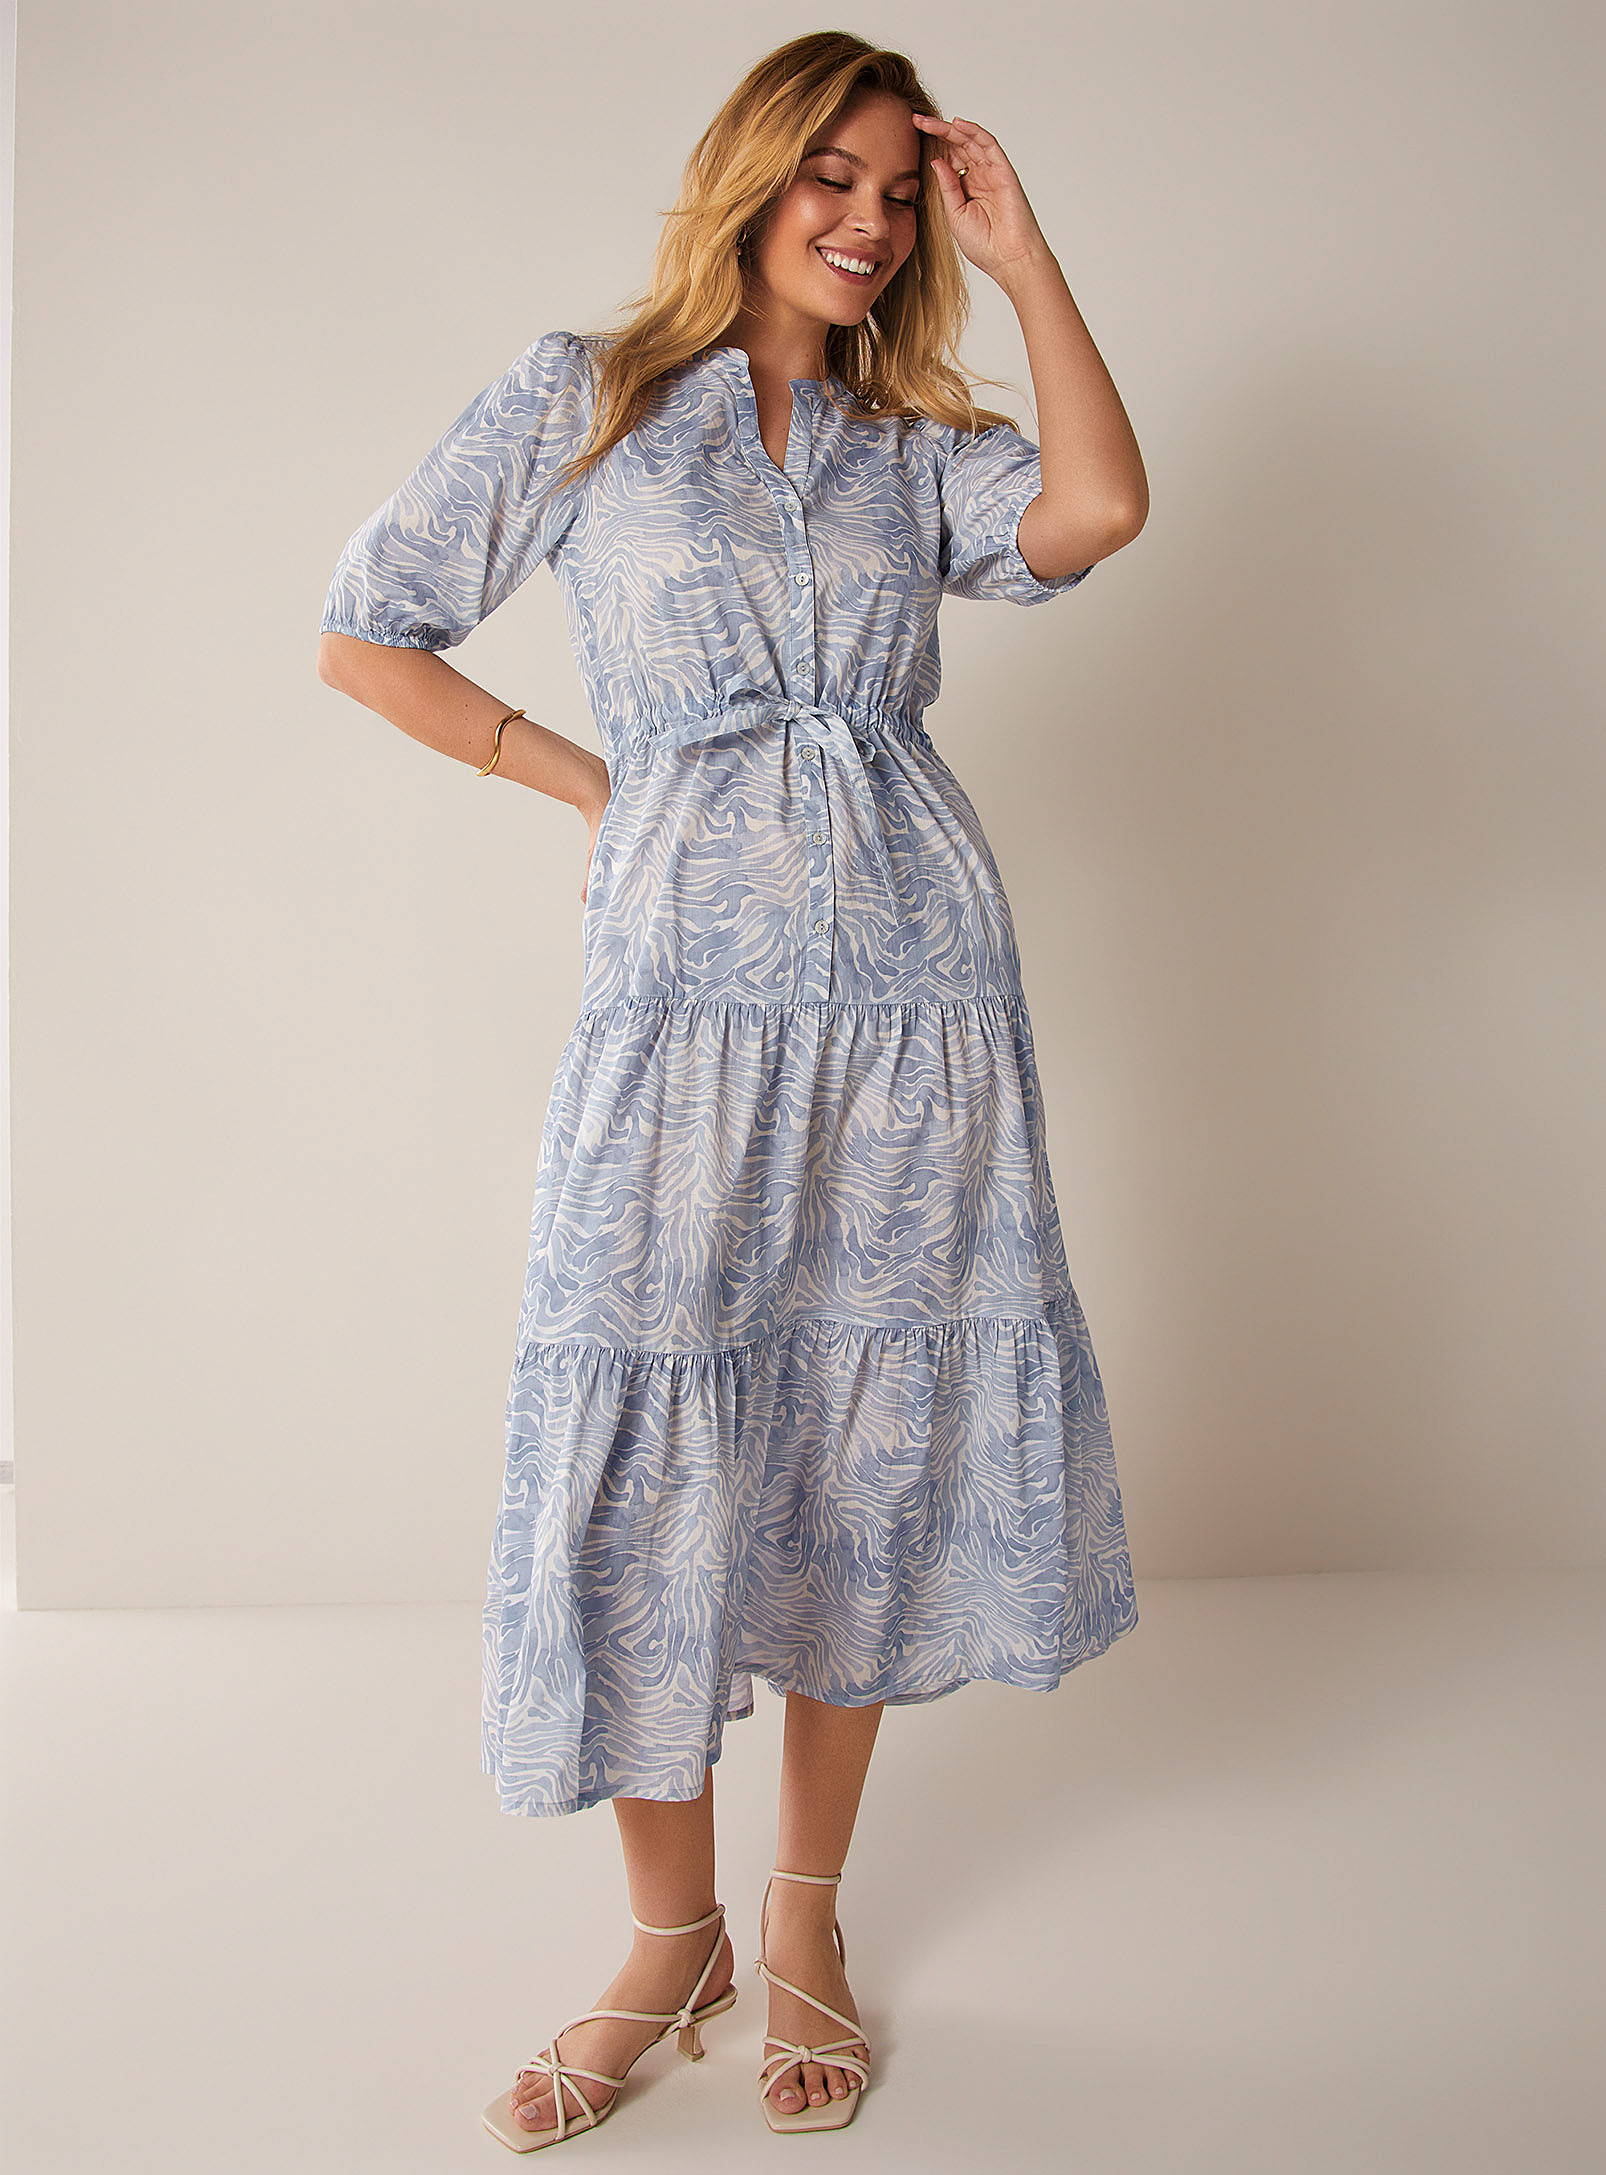 Yerse Watercolour Waves Tiered Dress In Patterned Blue